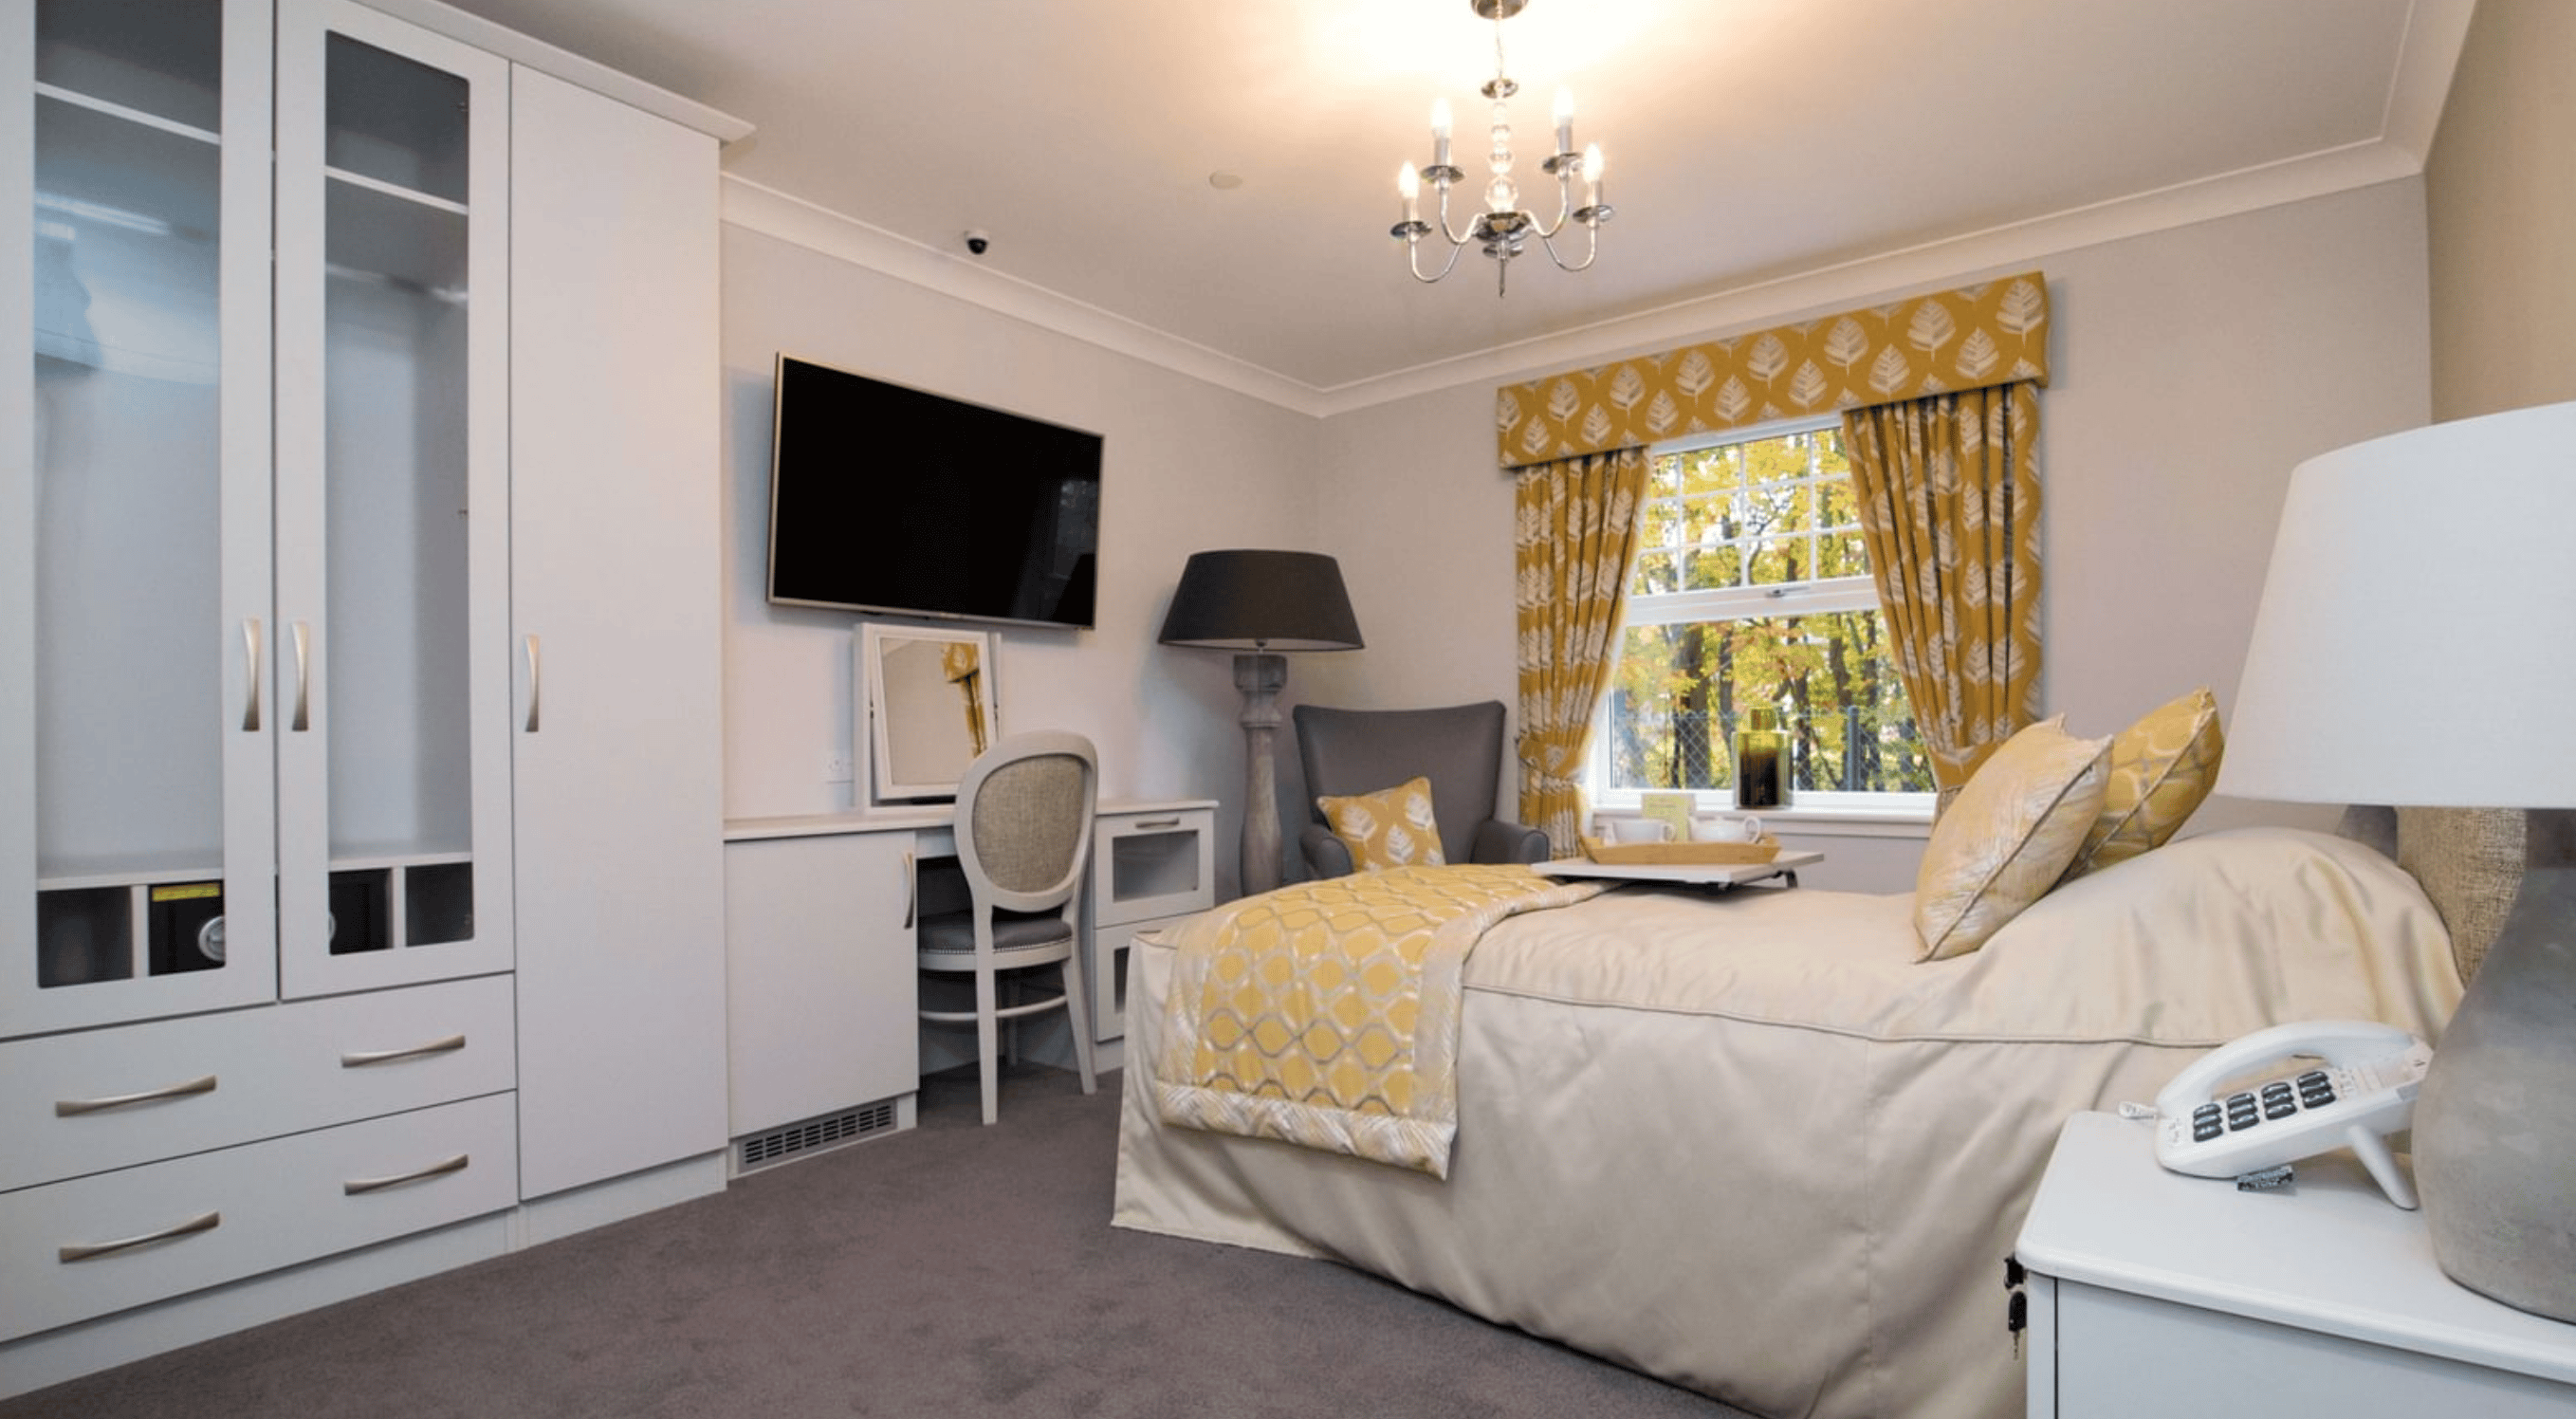 Bedroom at Horsell Lodge Care Home in Woking, Surrey